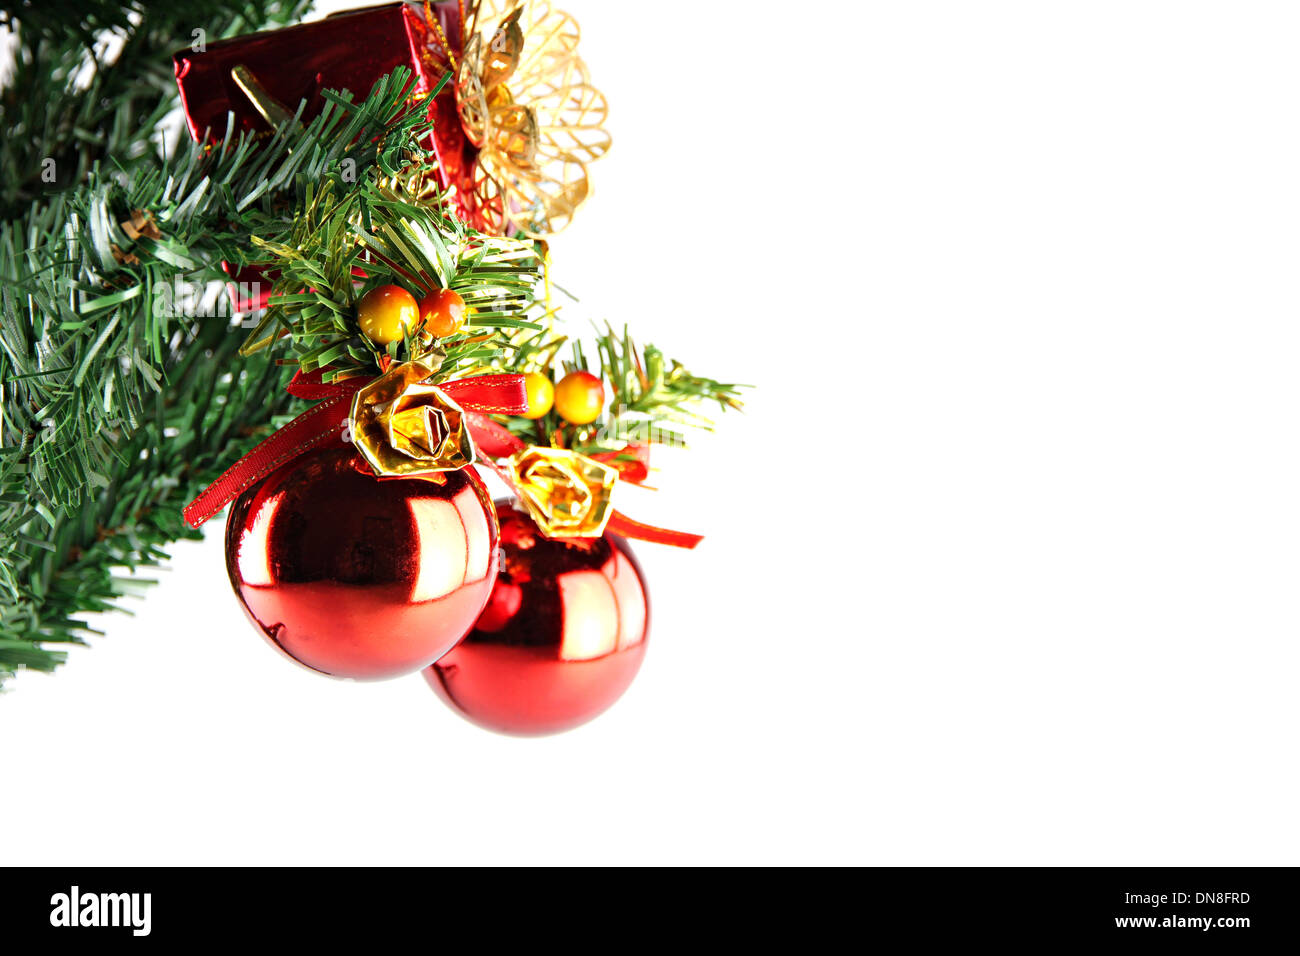 Two Red ball hanging on branch of Christmas tree Stock Photo